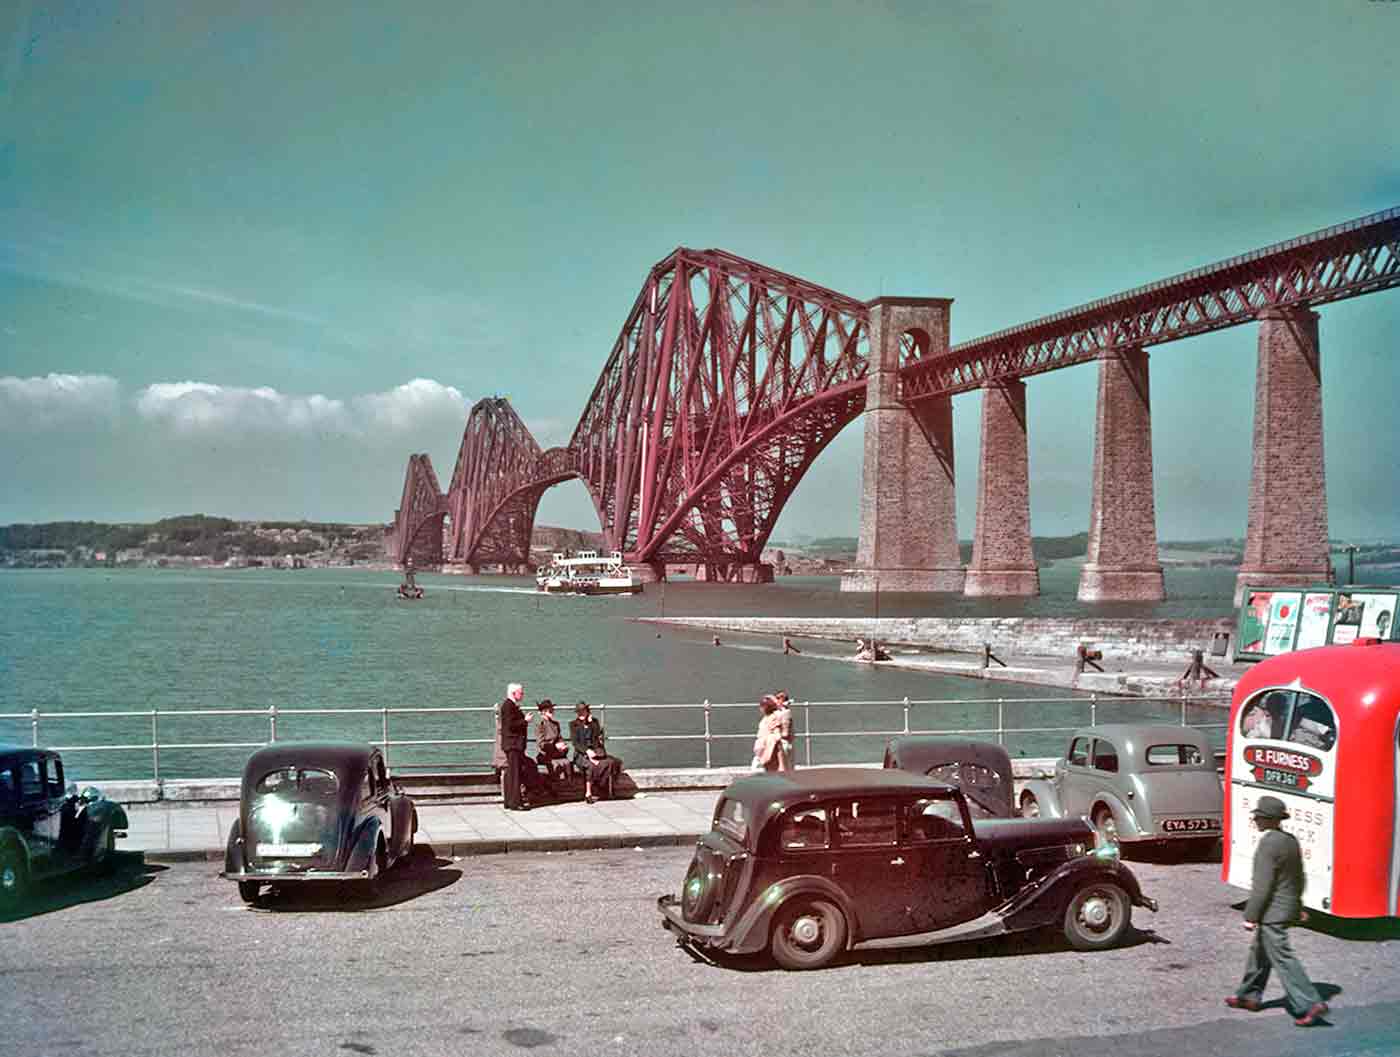 The Forth Bridge photographed from South Queensferry.  Photo taken by Kenneth F Balmain.  Date of the photo not known.